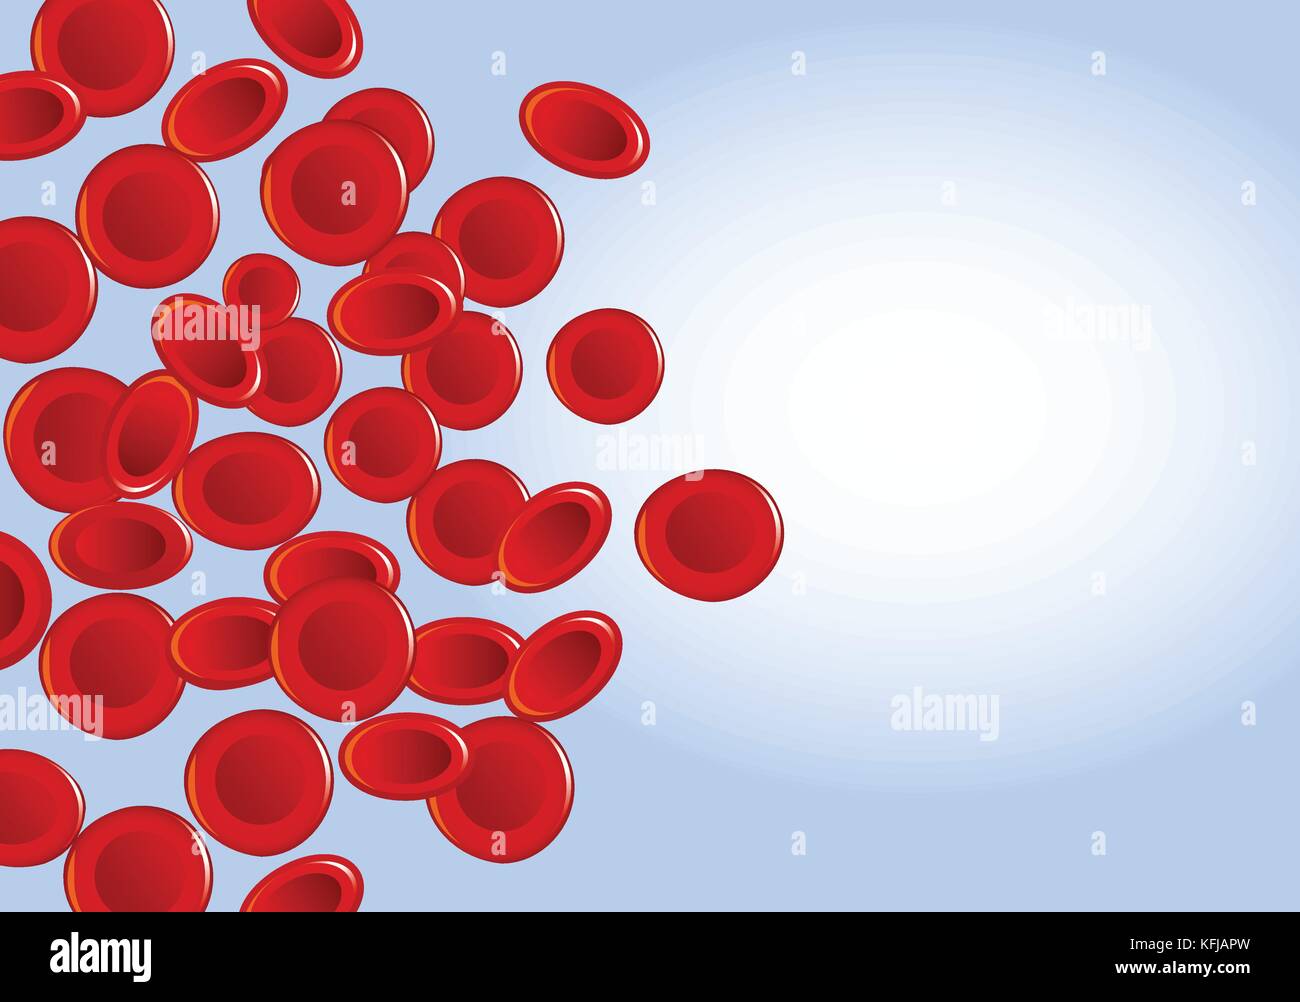 Red blood cells on blue background. Stock Vector